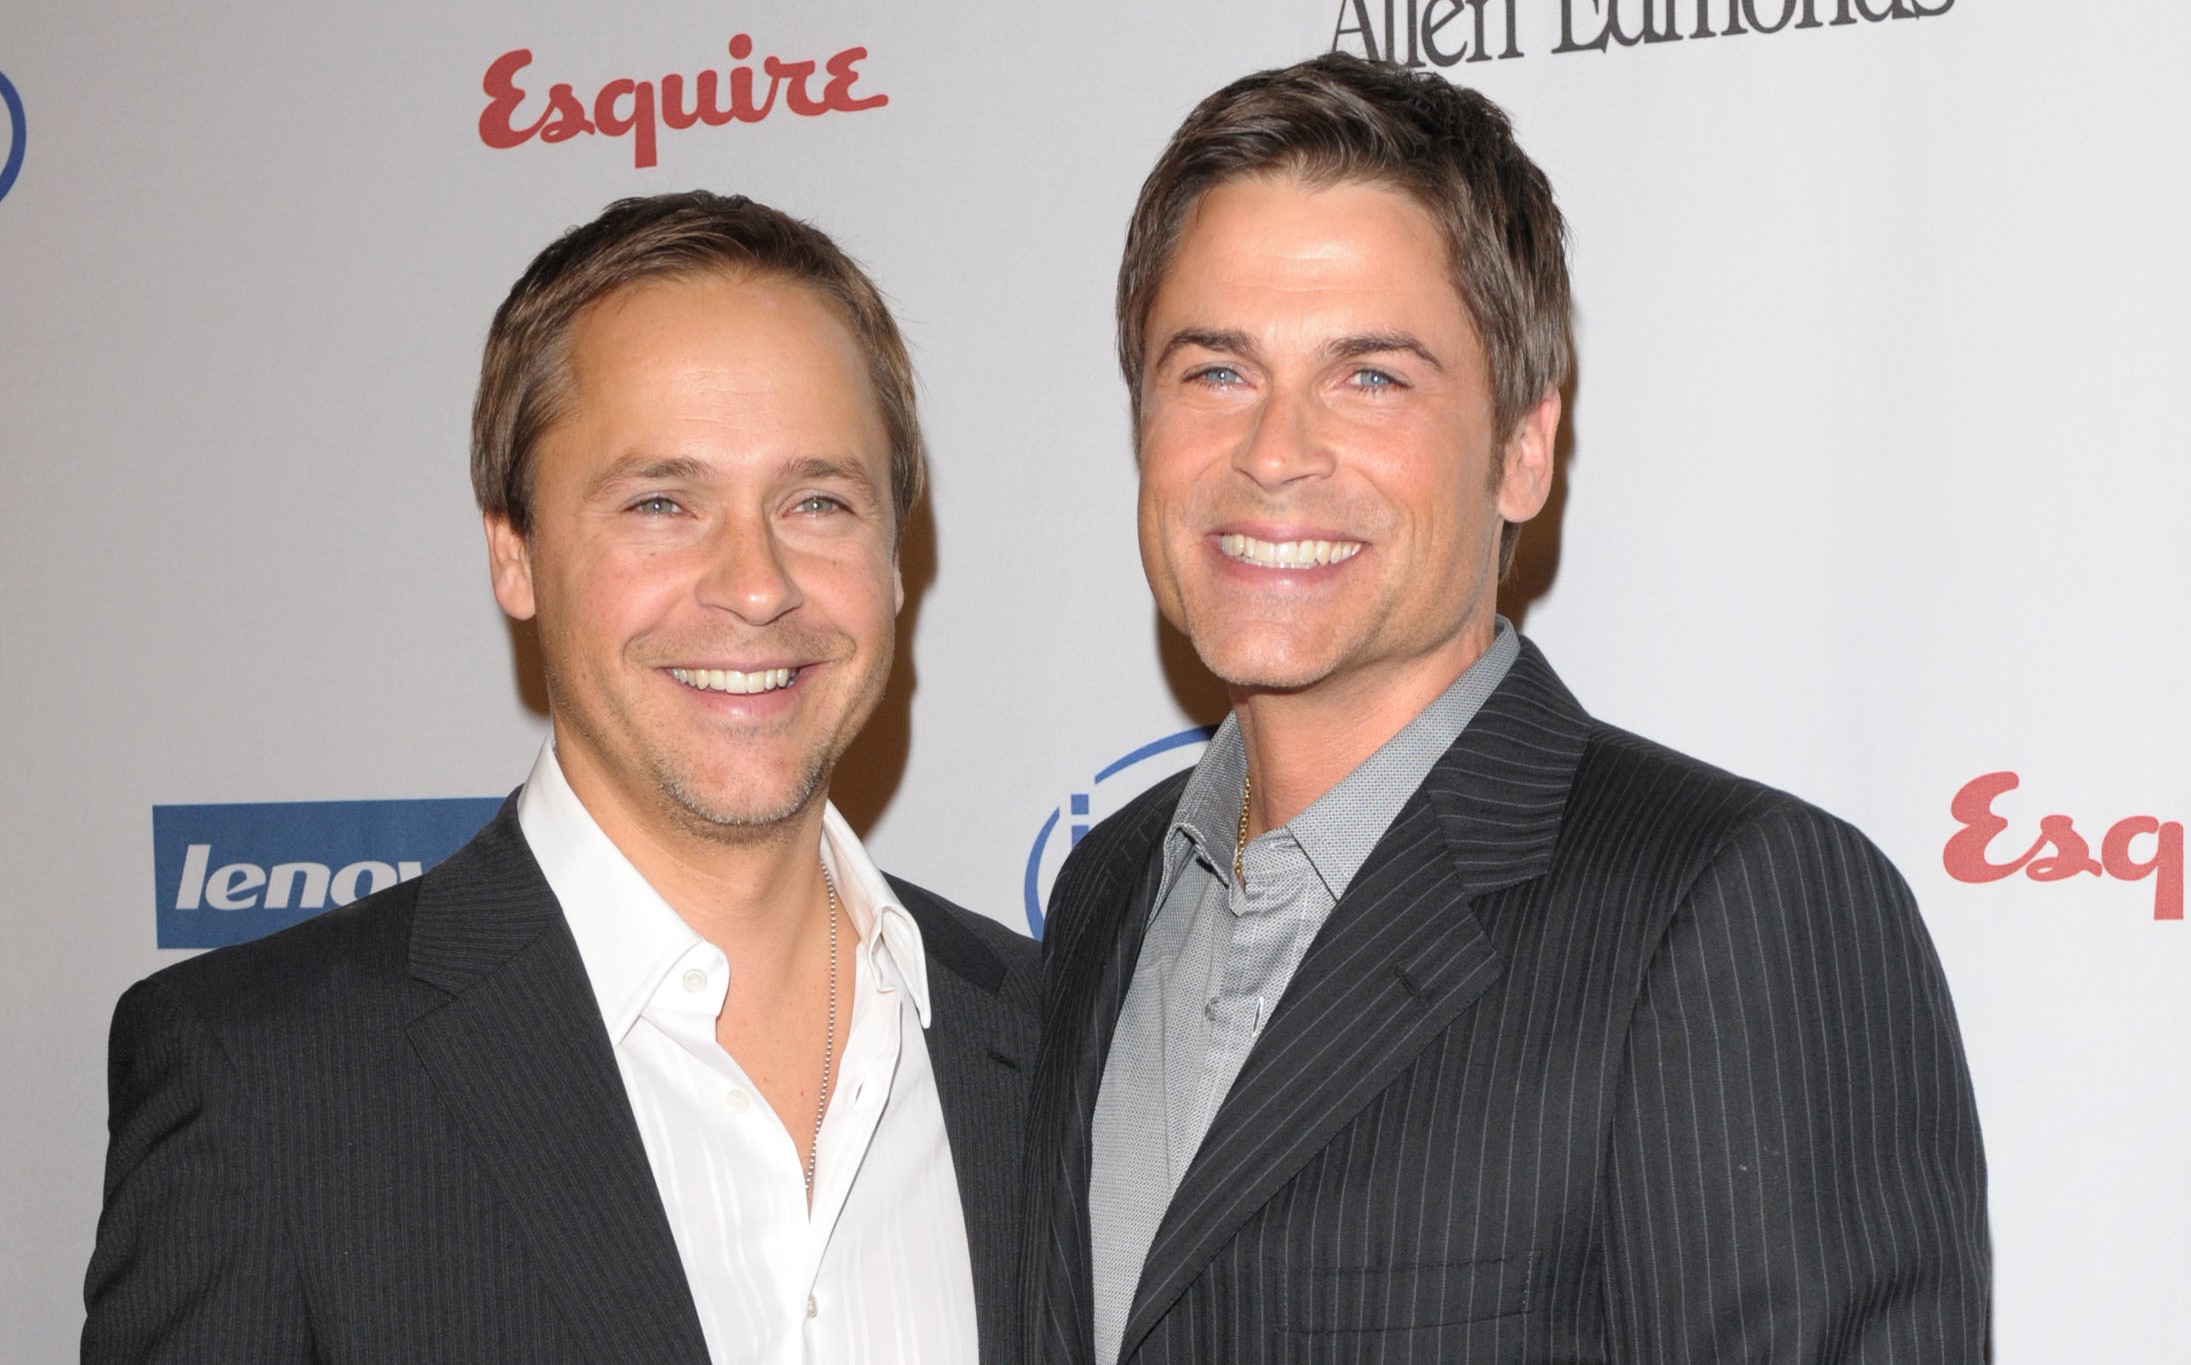 Chad Lowe and Rob Lowe arrive at the 11th Hollywood Legacy Awards at the Esquire House, in the Hollywood Hills, Los Angeles, on November 01, 2008. | Source: Getty Images